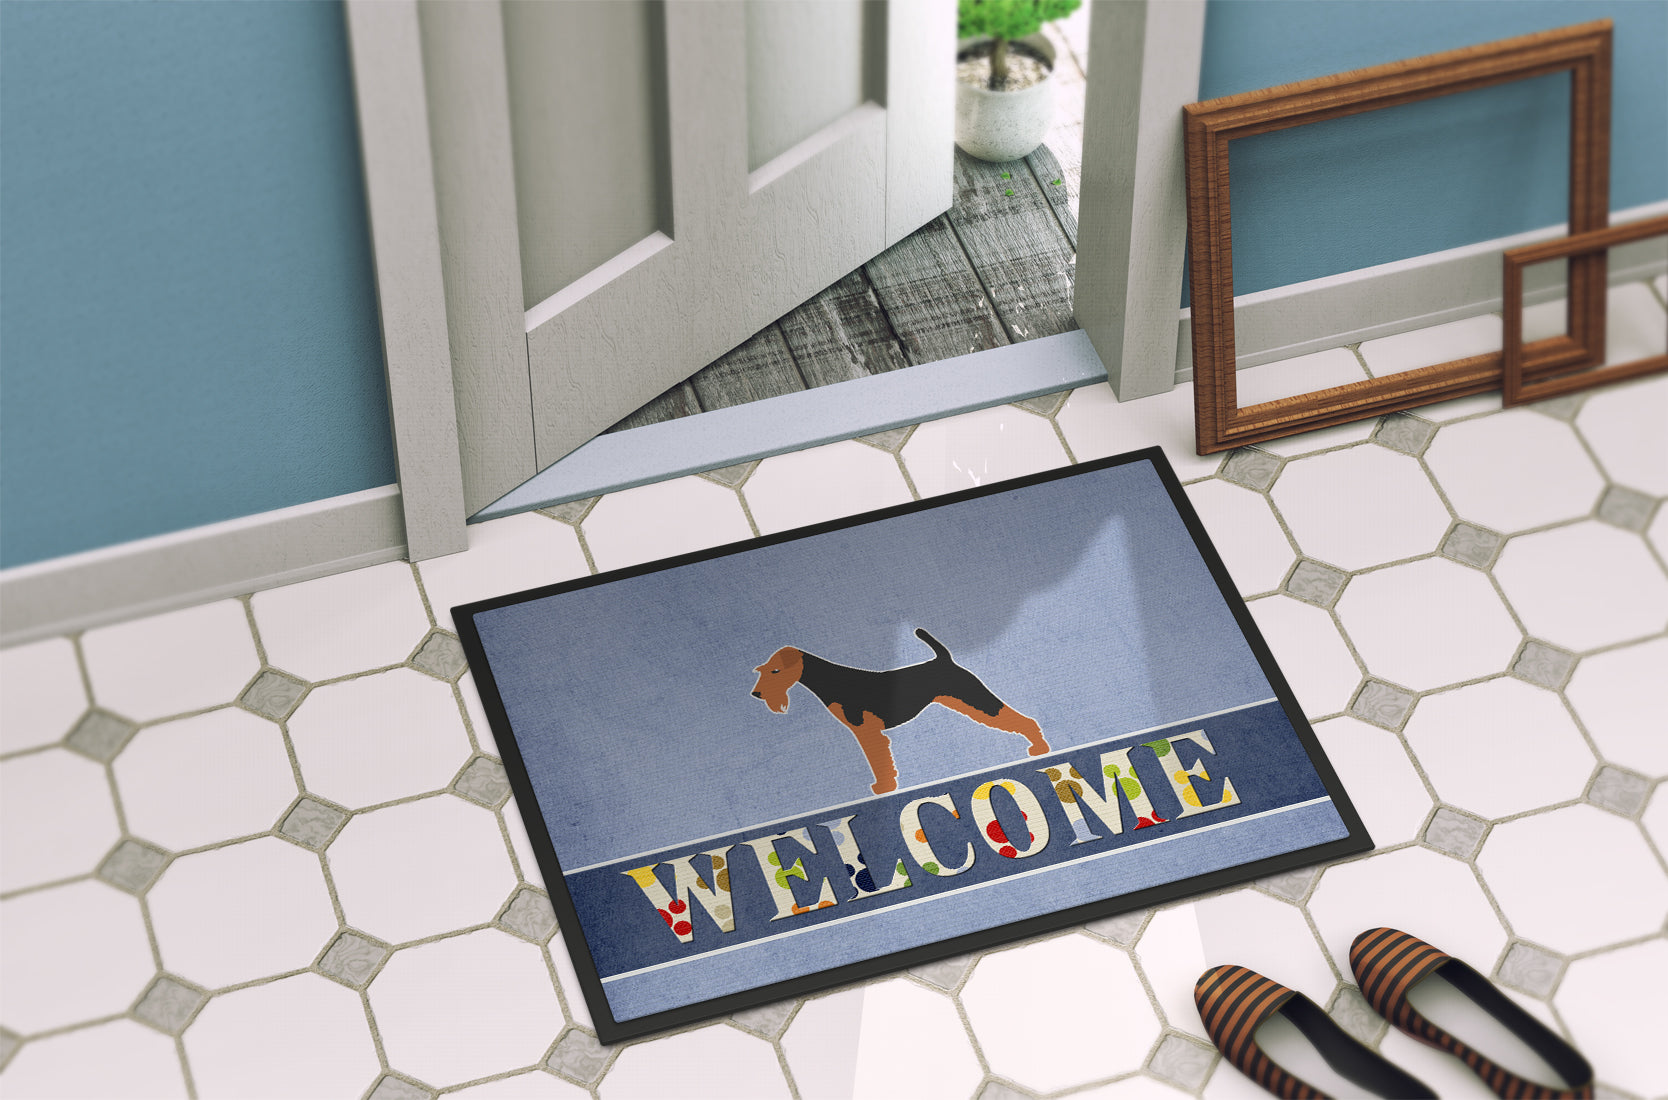 Airedale Terrier Welcome Indoor or Outdoor Mat 18x27 BB5561MAT - the-store.com